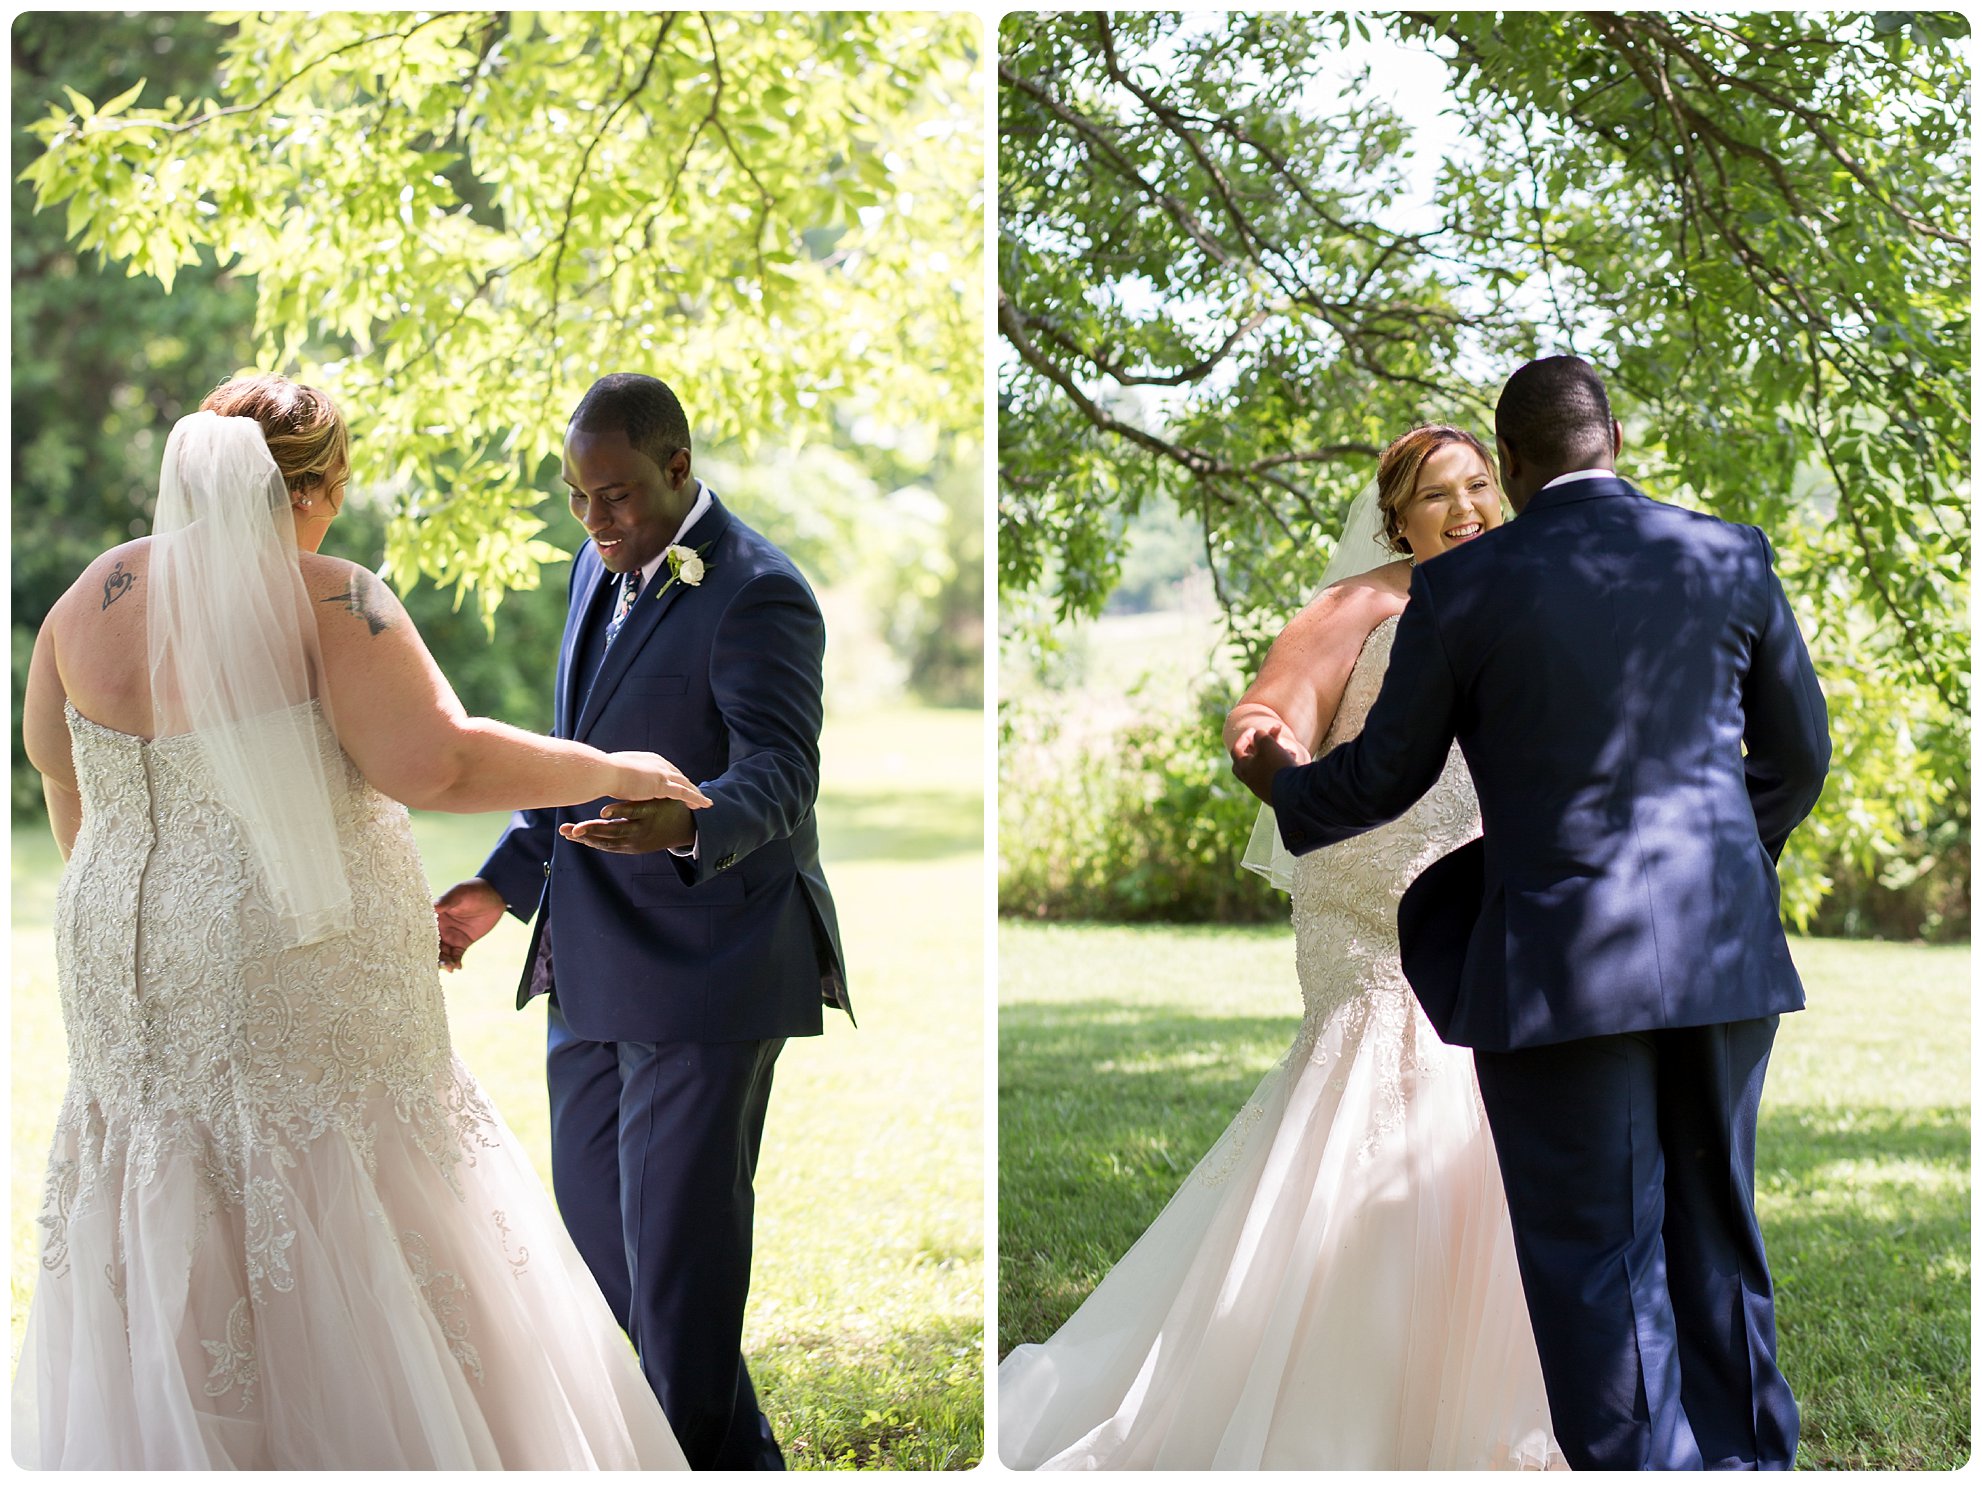 Nashville wedding at Iriswoods, Southern Belles and Blooms, navy tuxedo, whimsical garden wedding, southern wedding, southern bride, nashville bride, melanie grady photography, the best nashville wedding photographer, interracial couple wedding, mt juliet, first look